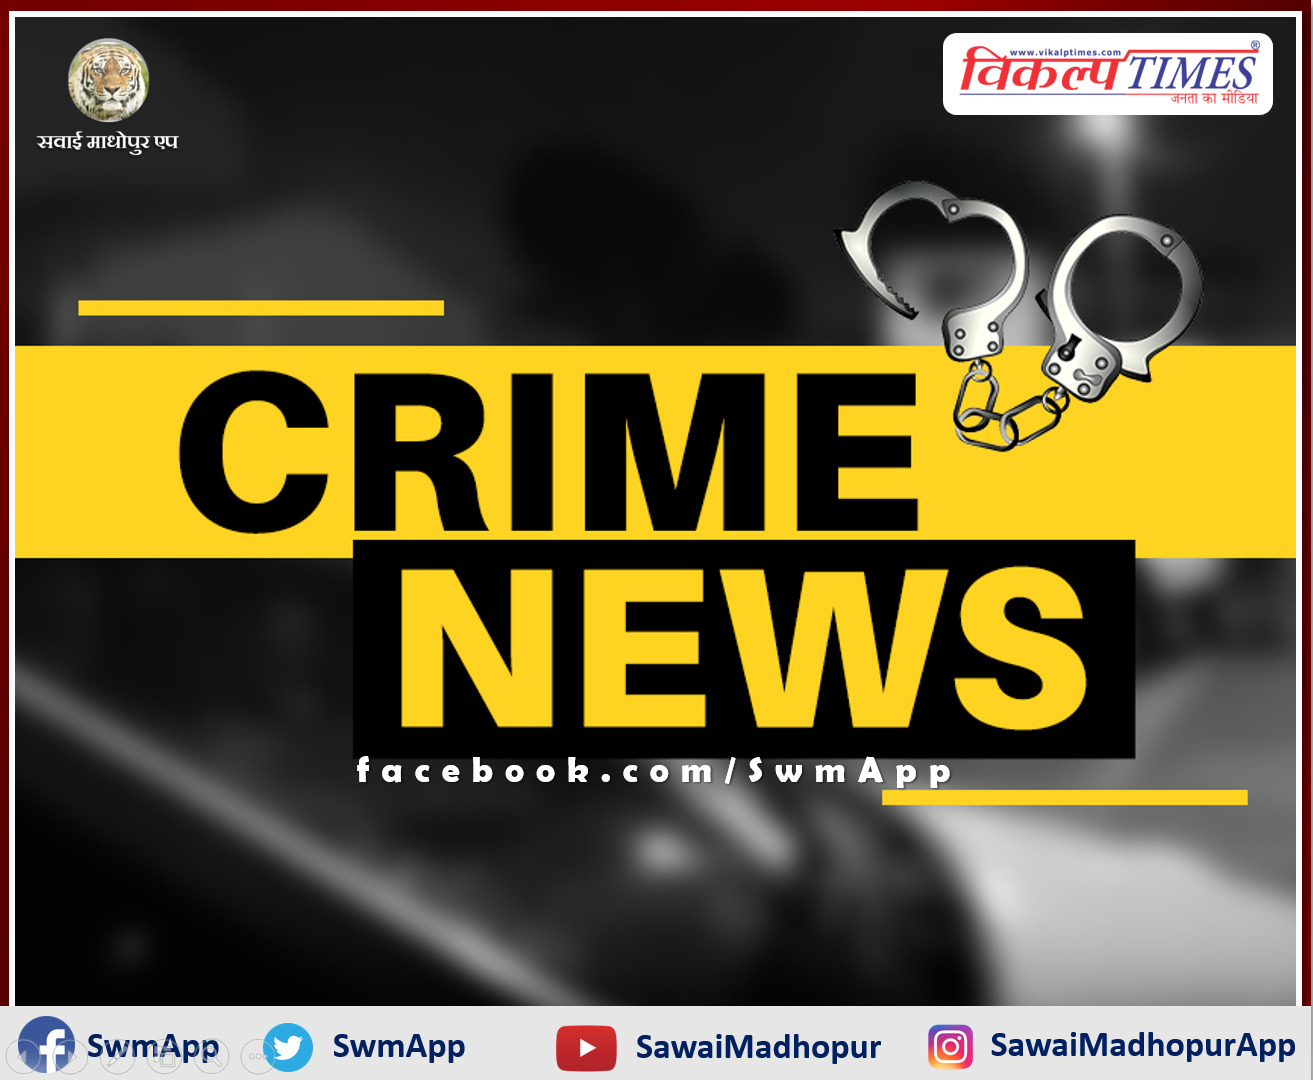 Police arrested 21 accused in sawai madhopur